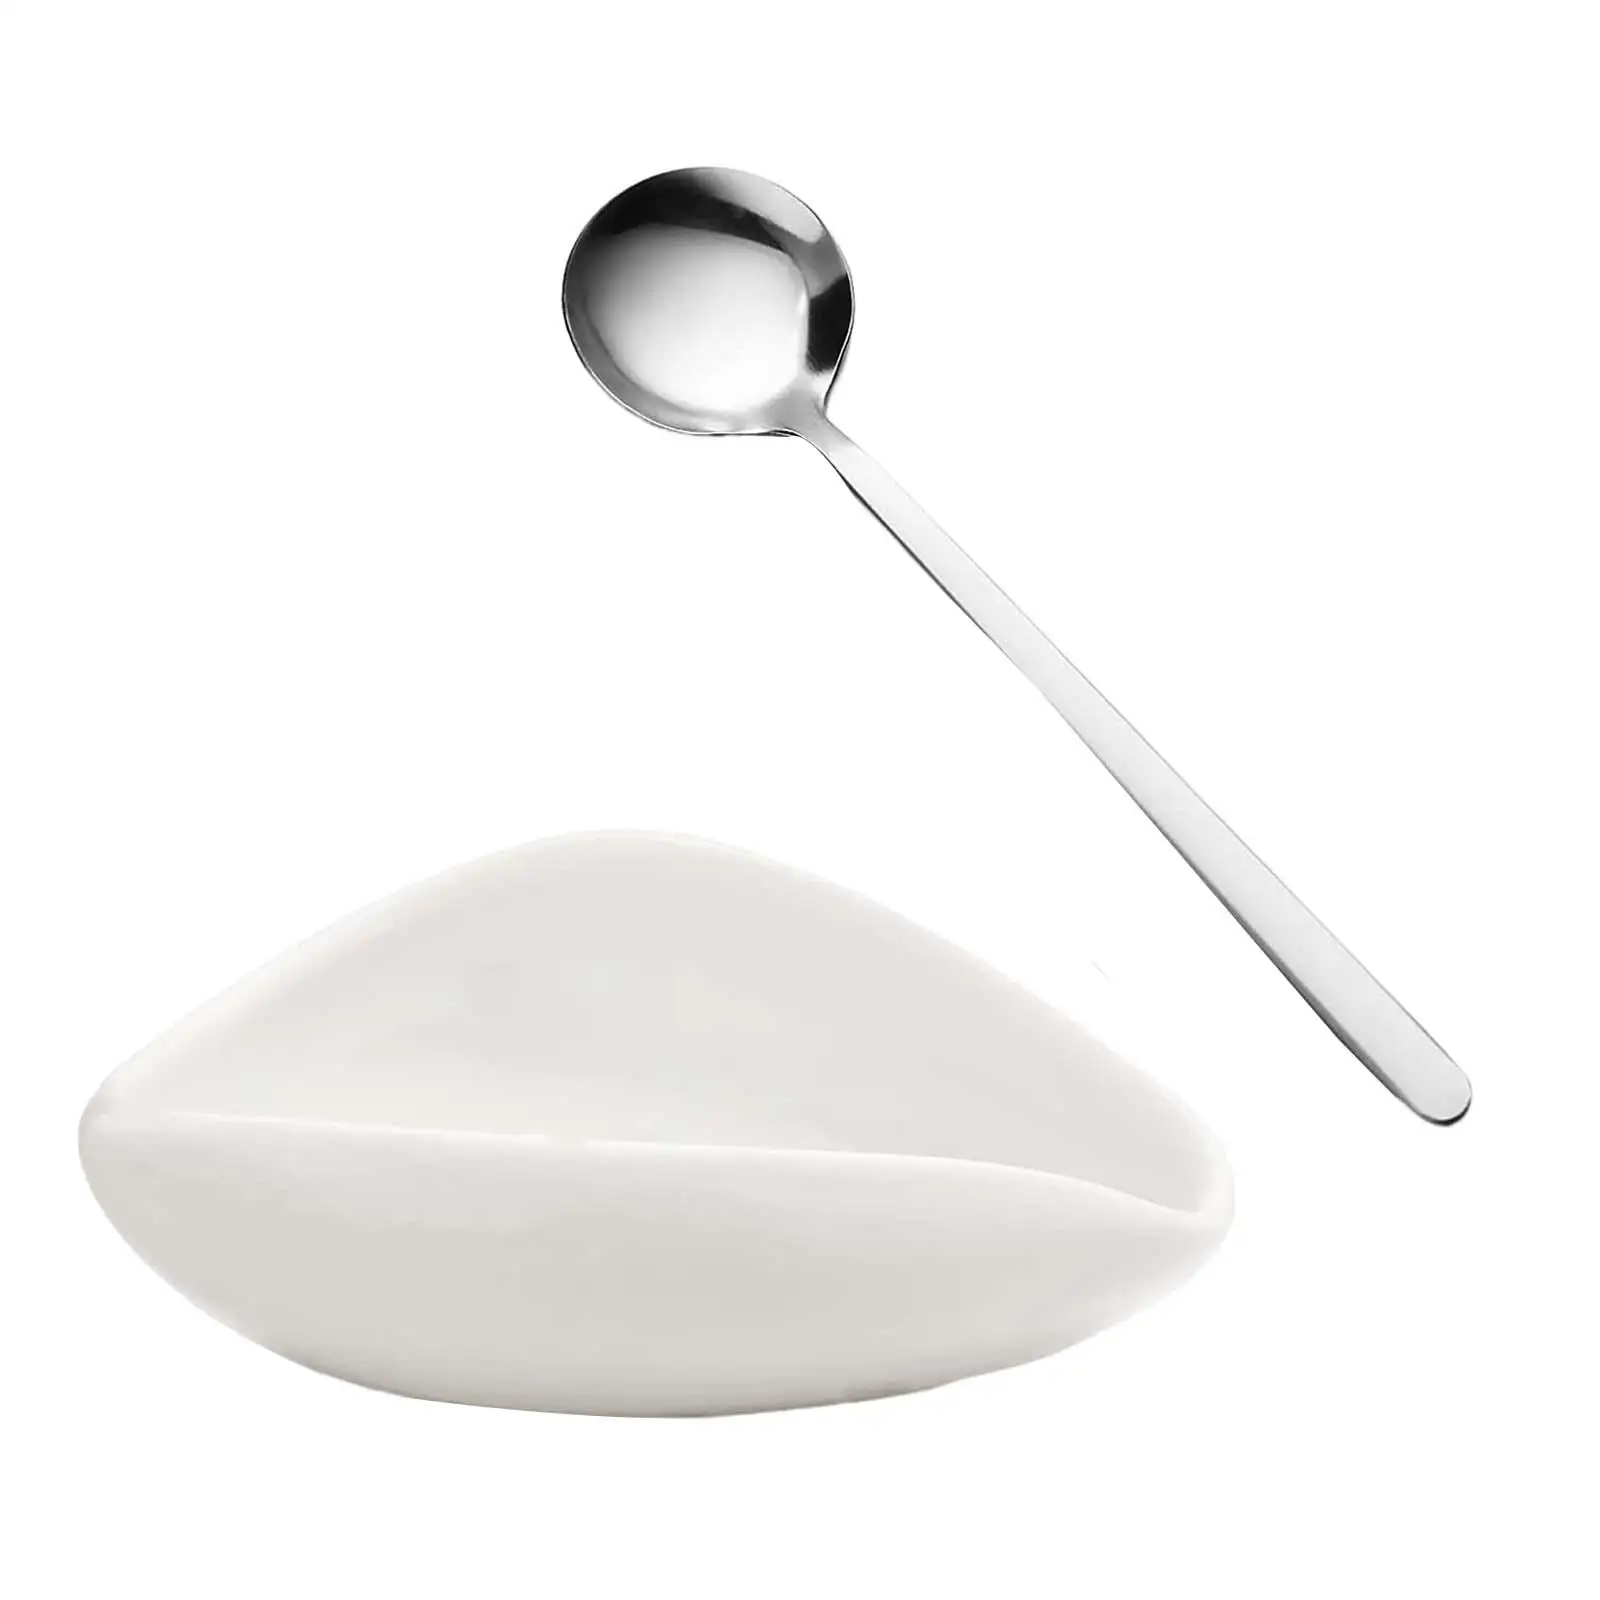 Coffee Bean Dosing Bowl Utensil Tea Accessory Coffee Spoon Single Coffee Tray for Dining Room Cafe Office Home